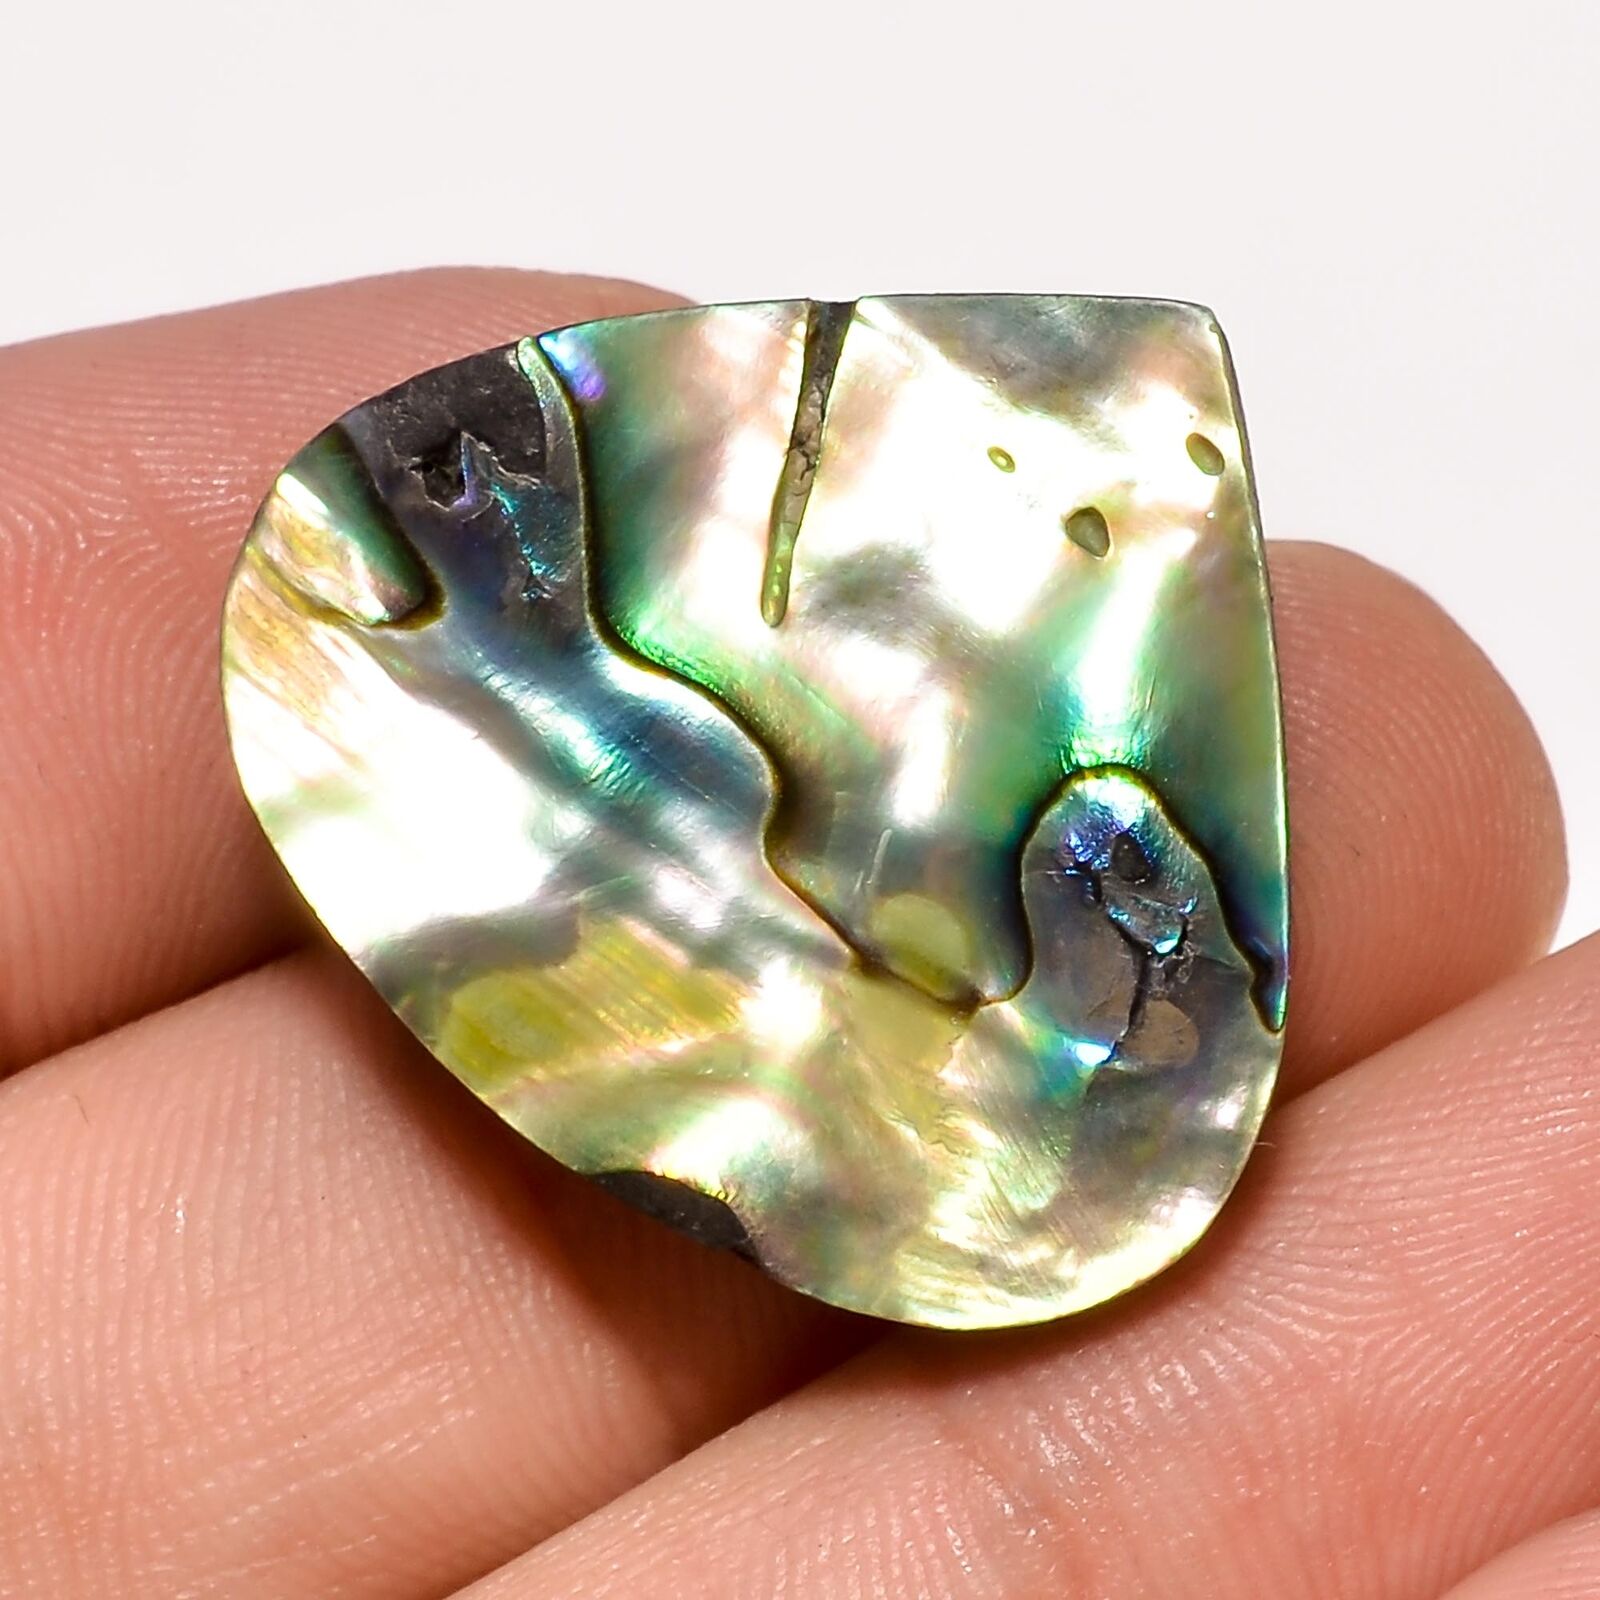 25 Ct. 100% Natural Abalone Shell Cabochon Loose Gemstone 23x25x6 Mm Hb-3936